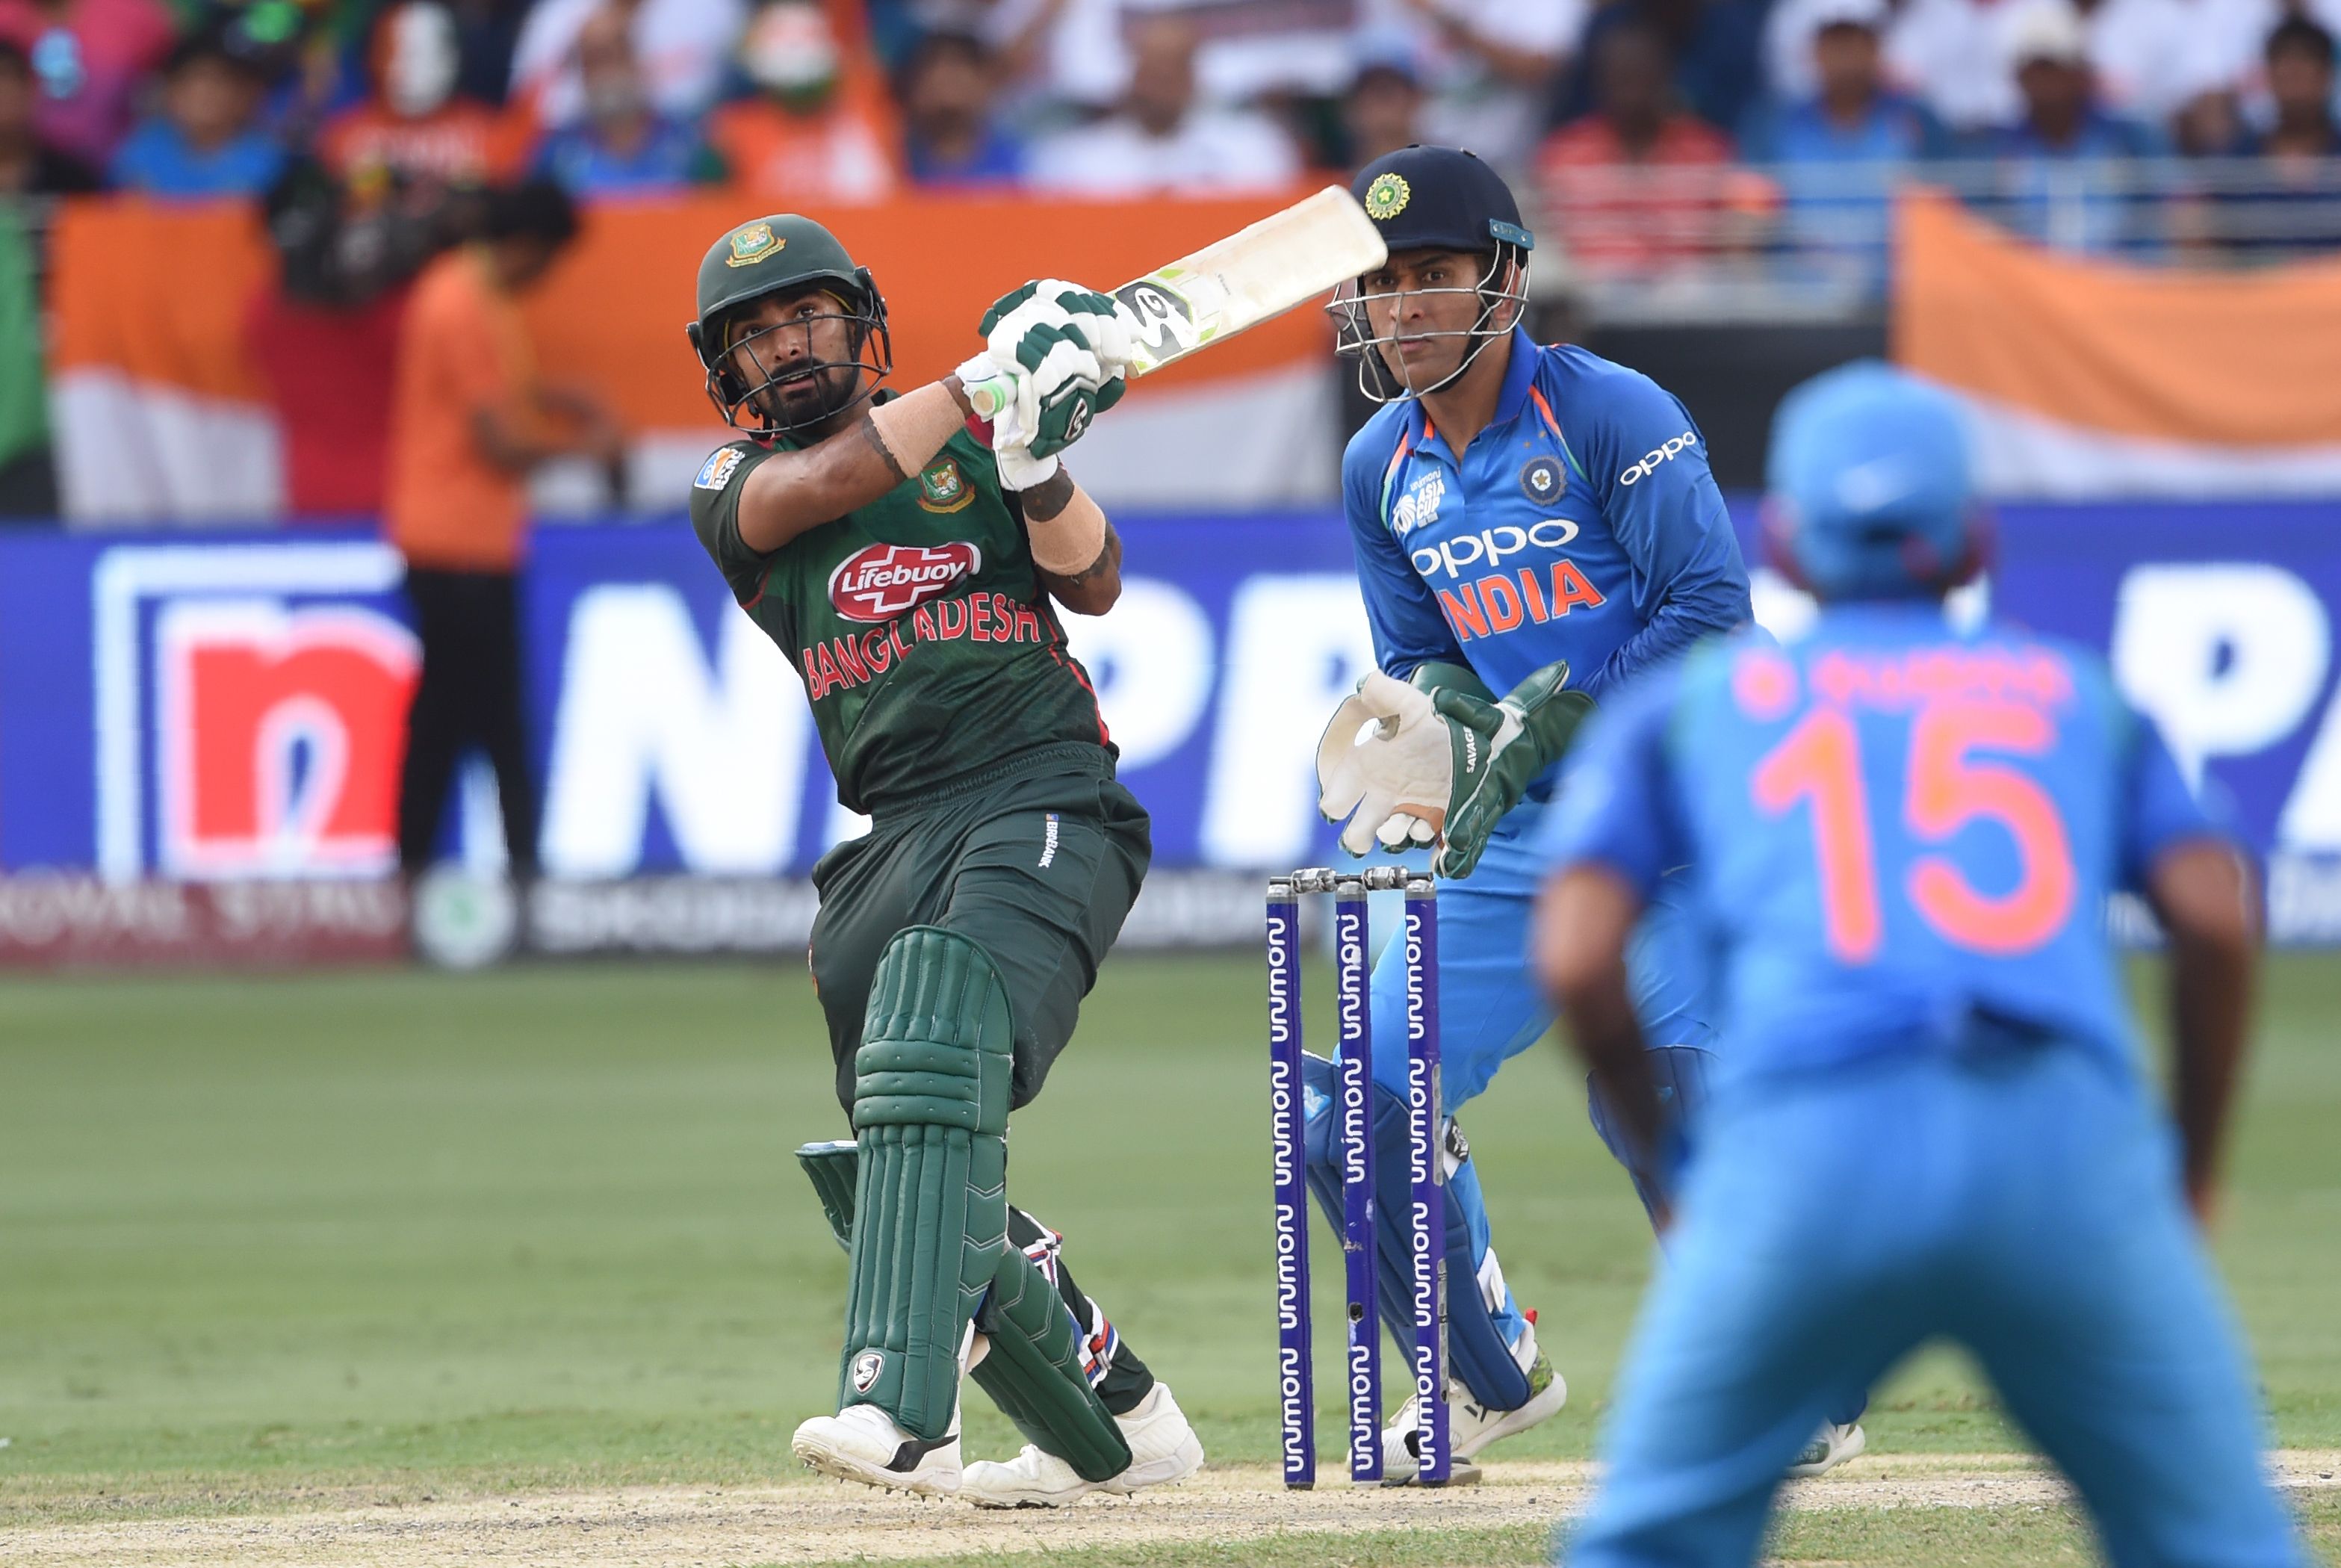 Bangladesh batsman Liton Das plays a shot as Indian wicketkeeper Mahendra Singh Dhoni (L) looks on during the final one day international (ODI) Asia Cup cricket match between Bangladesh and India at the Dubai International Cricket Stadium in Dubai on September 28, 2018. / AFP 